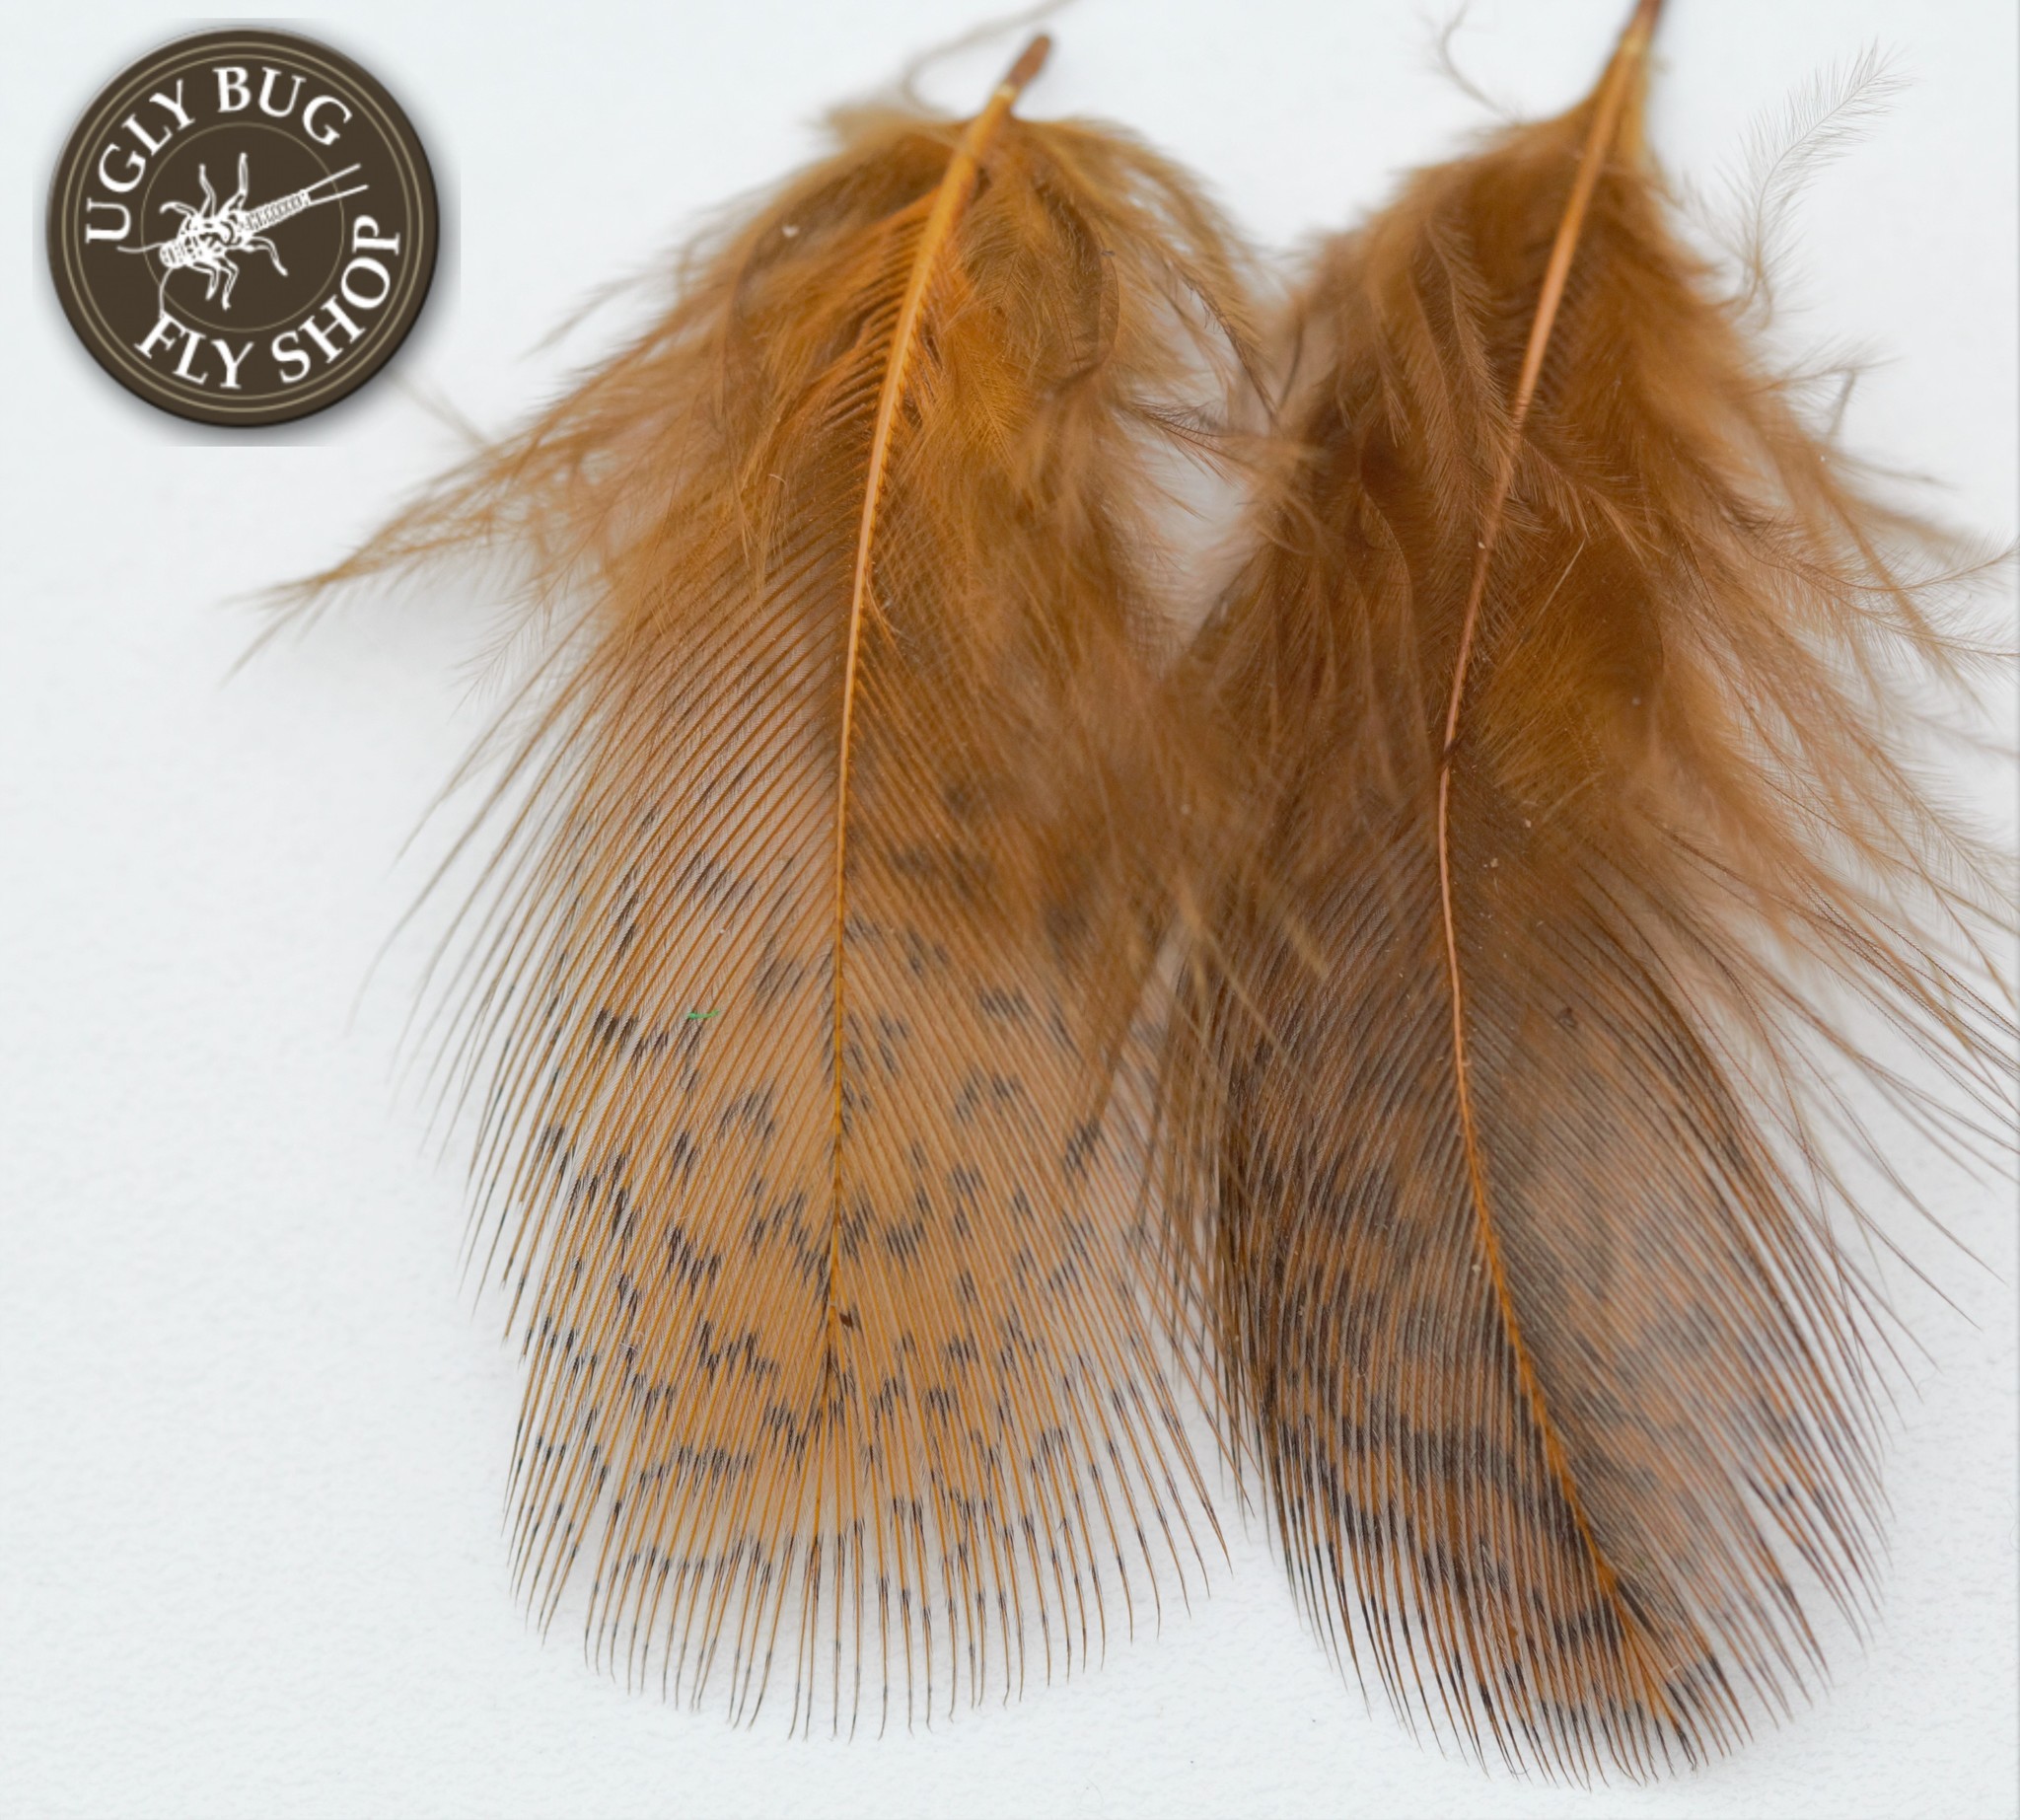 Fly Tying Techniques: Hungarian Partridge Feathers 